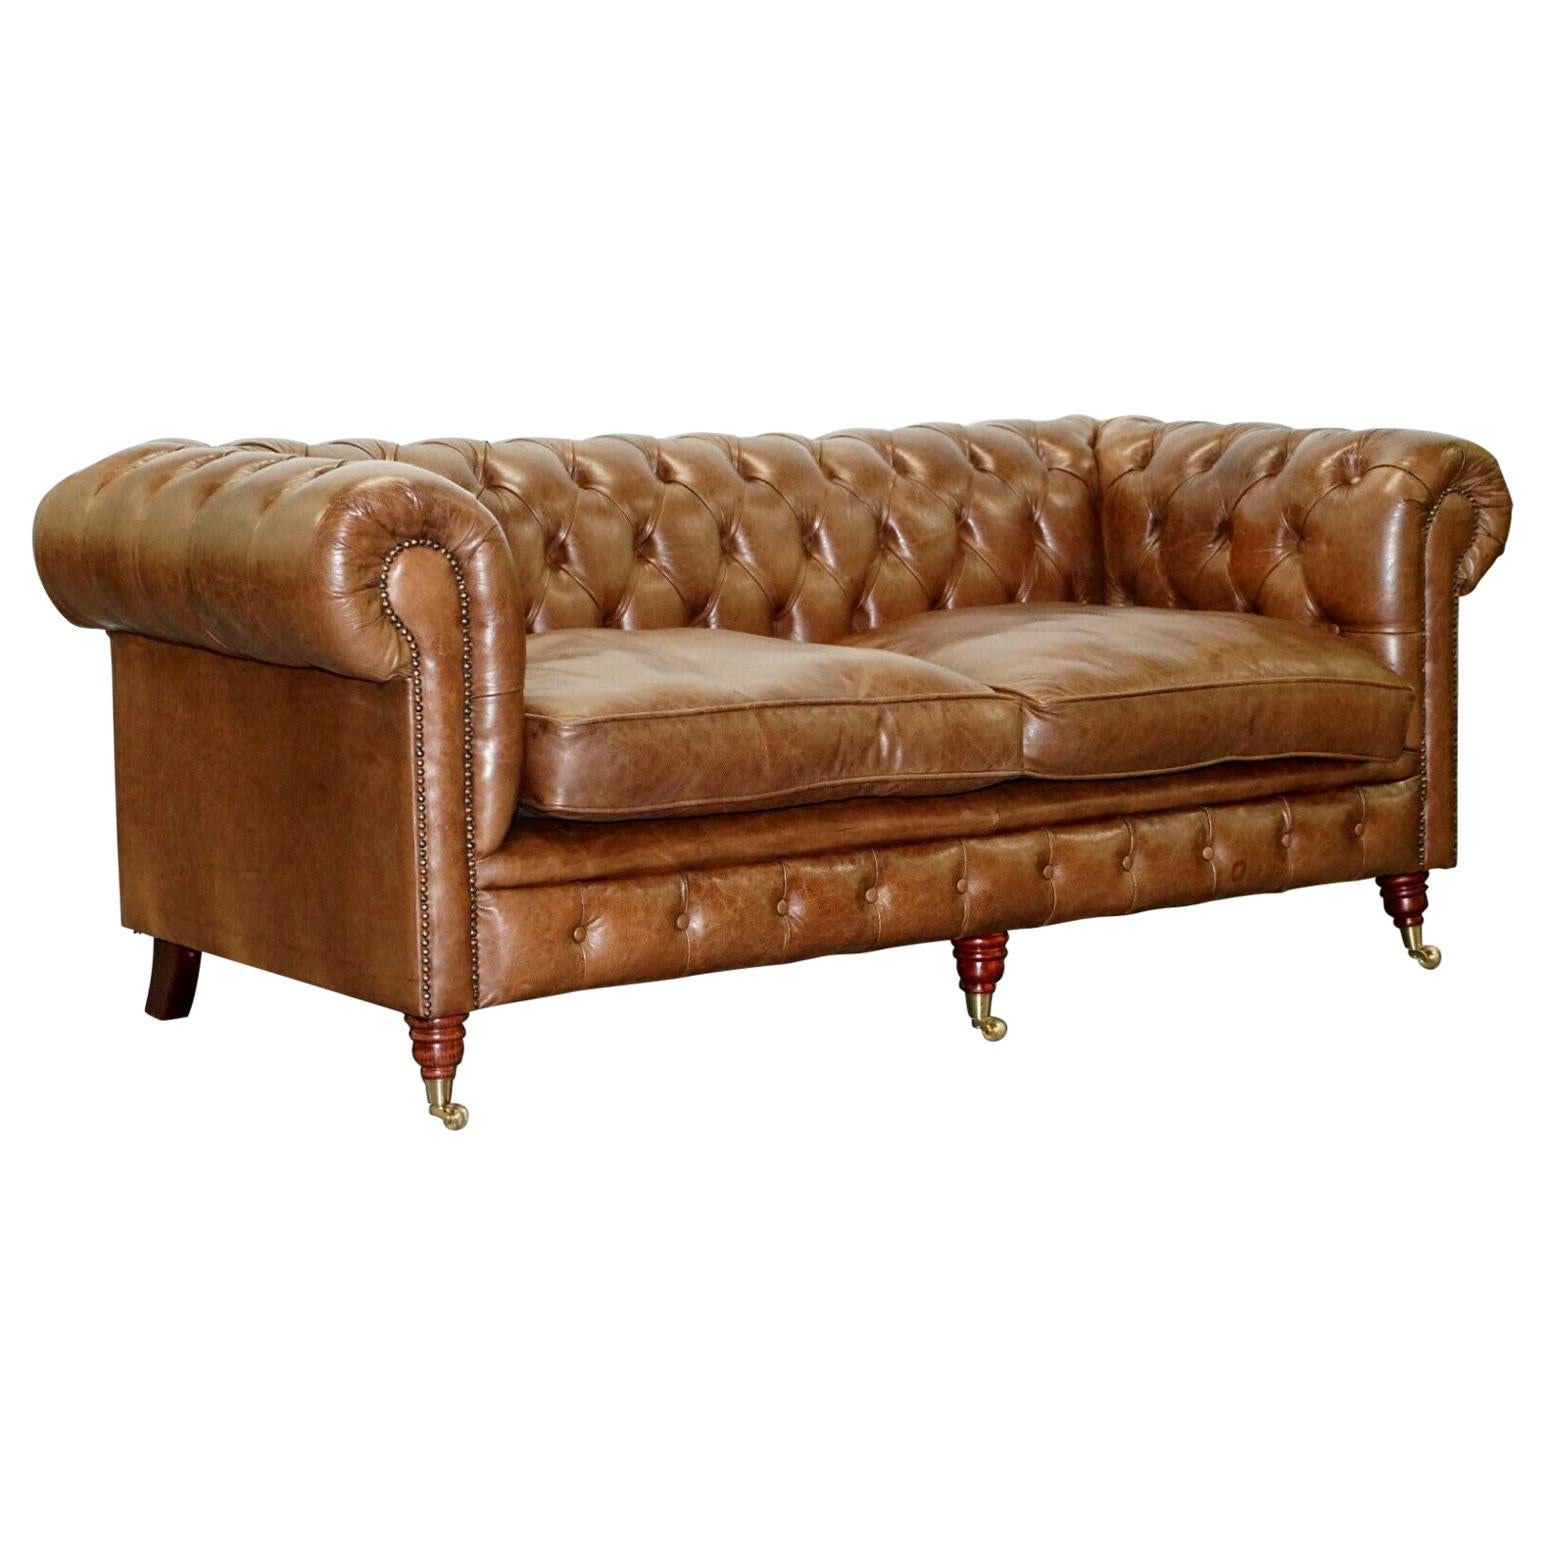 Chesterfield Tufted Heritage Brown Leather Three-Seat Sofa Part of a Large Suite